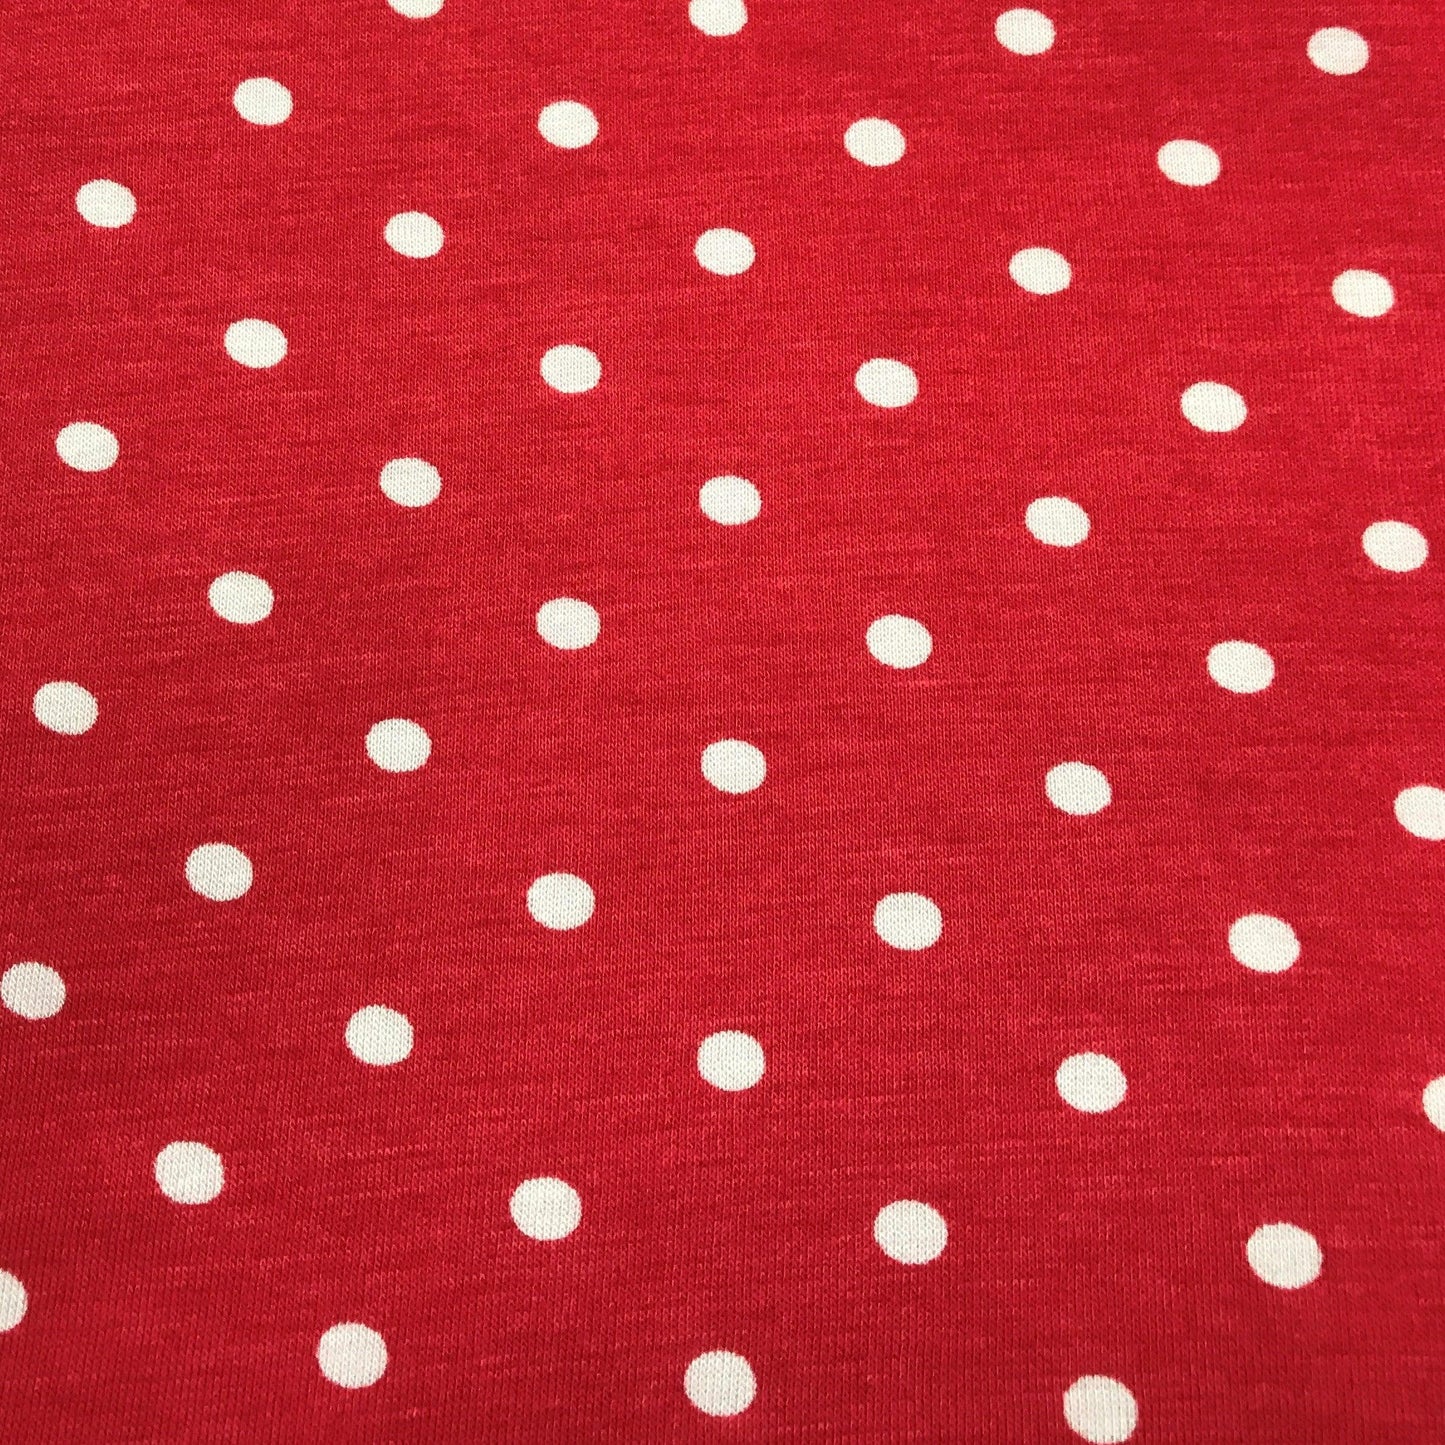 White 1/4" Dots on Red Cotton/Poly Jersey 